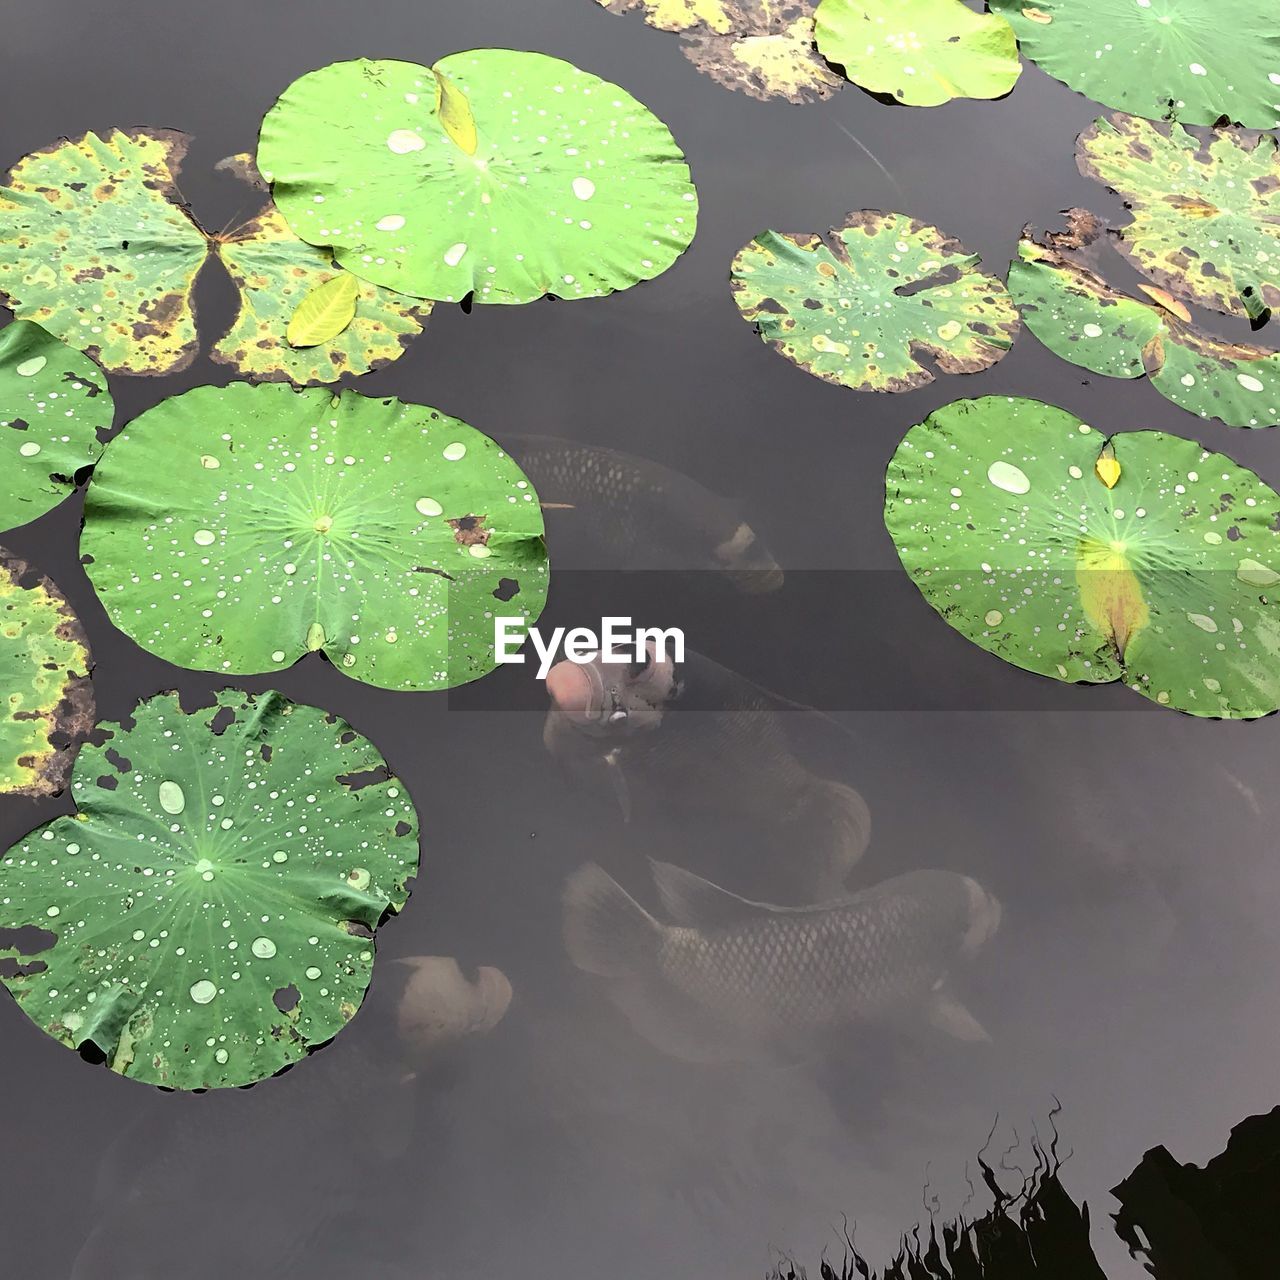 HIGH ANGLE VIEW OF LOTUS LEAVES FLOATING ON LAKE